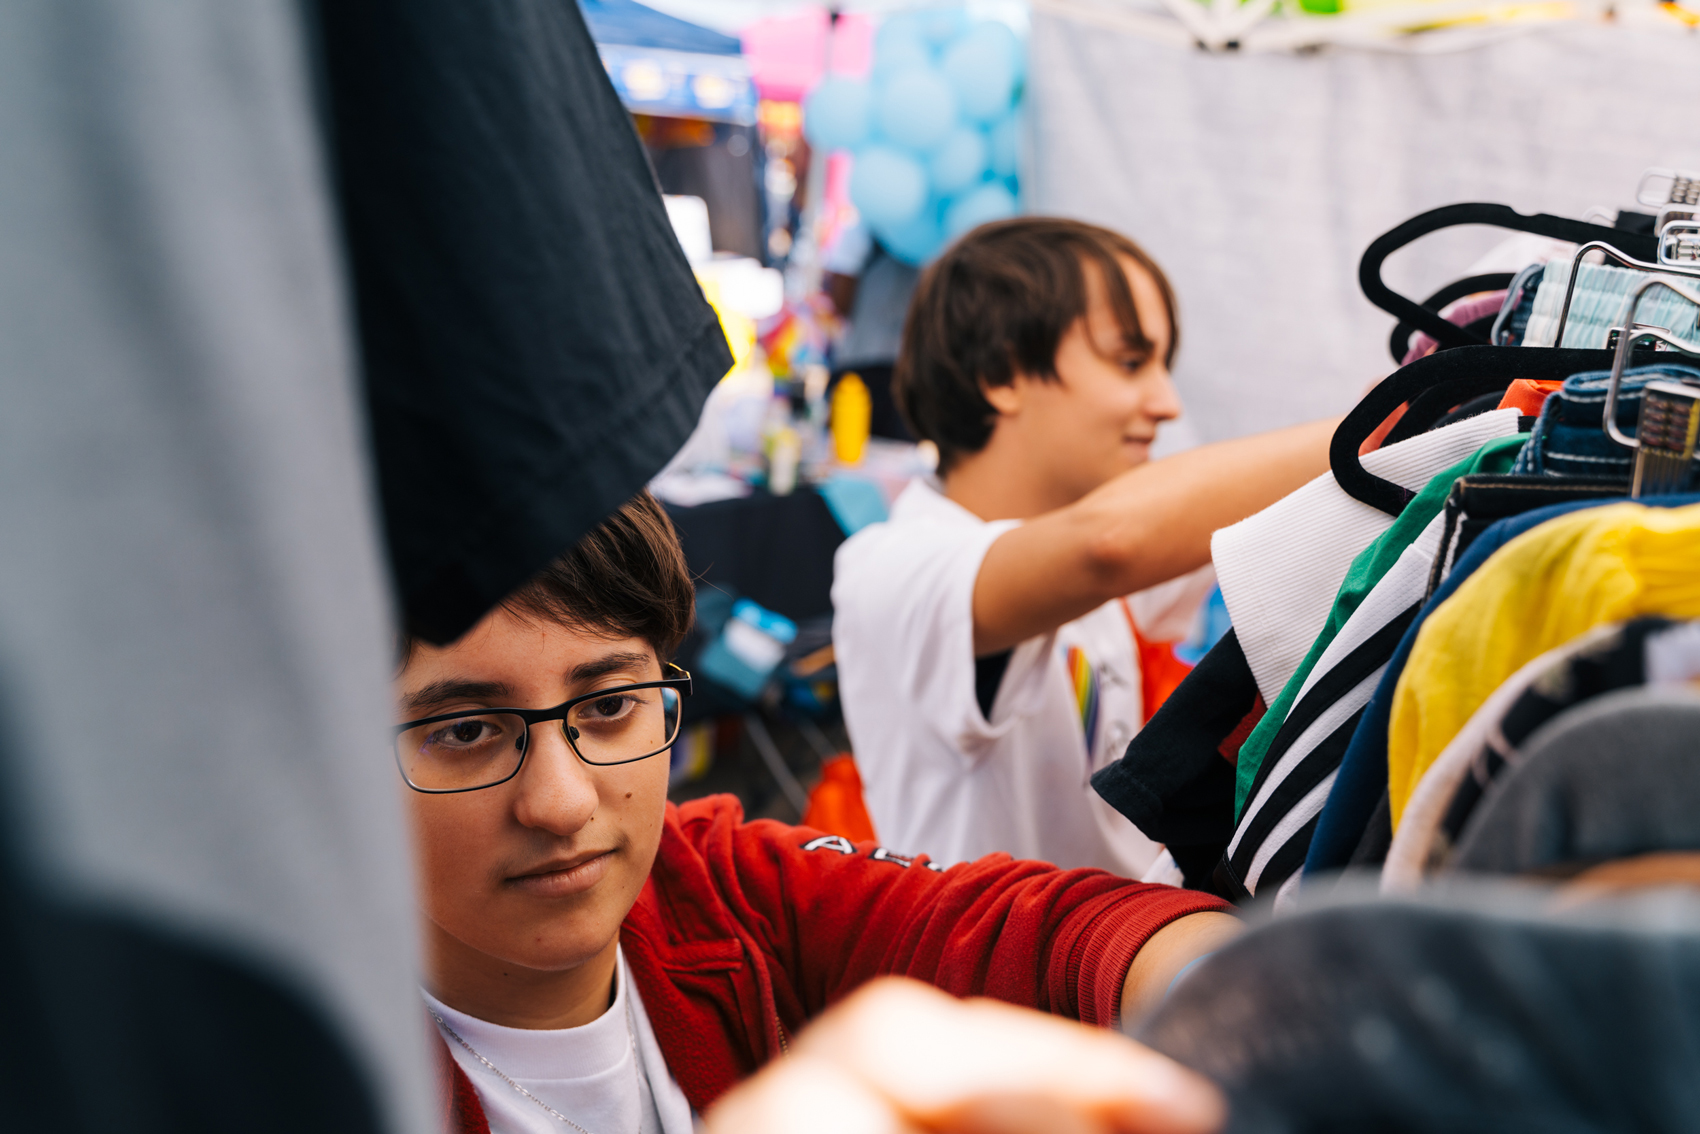 From the left, Ash Thornton, 16, and Travis Thornton, 16, from Tompkins High School, look through free clothing from Transparent Closet during Katy Pride festival at First Christian Church